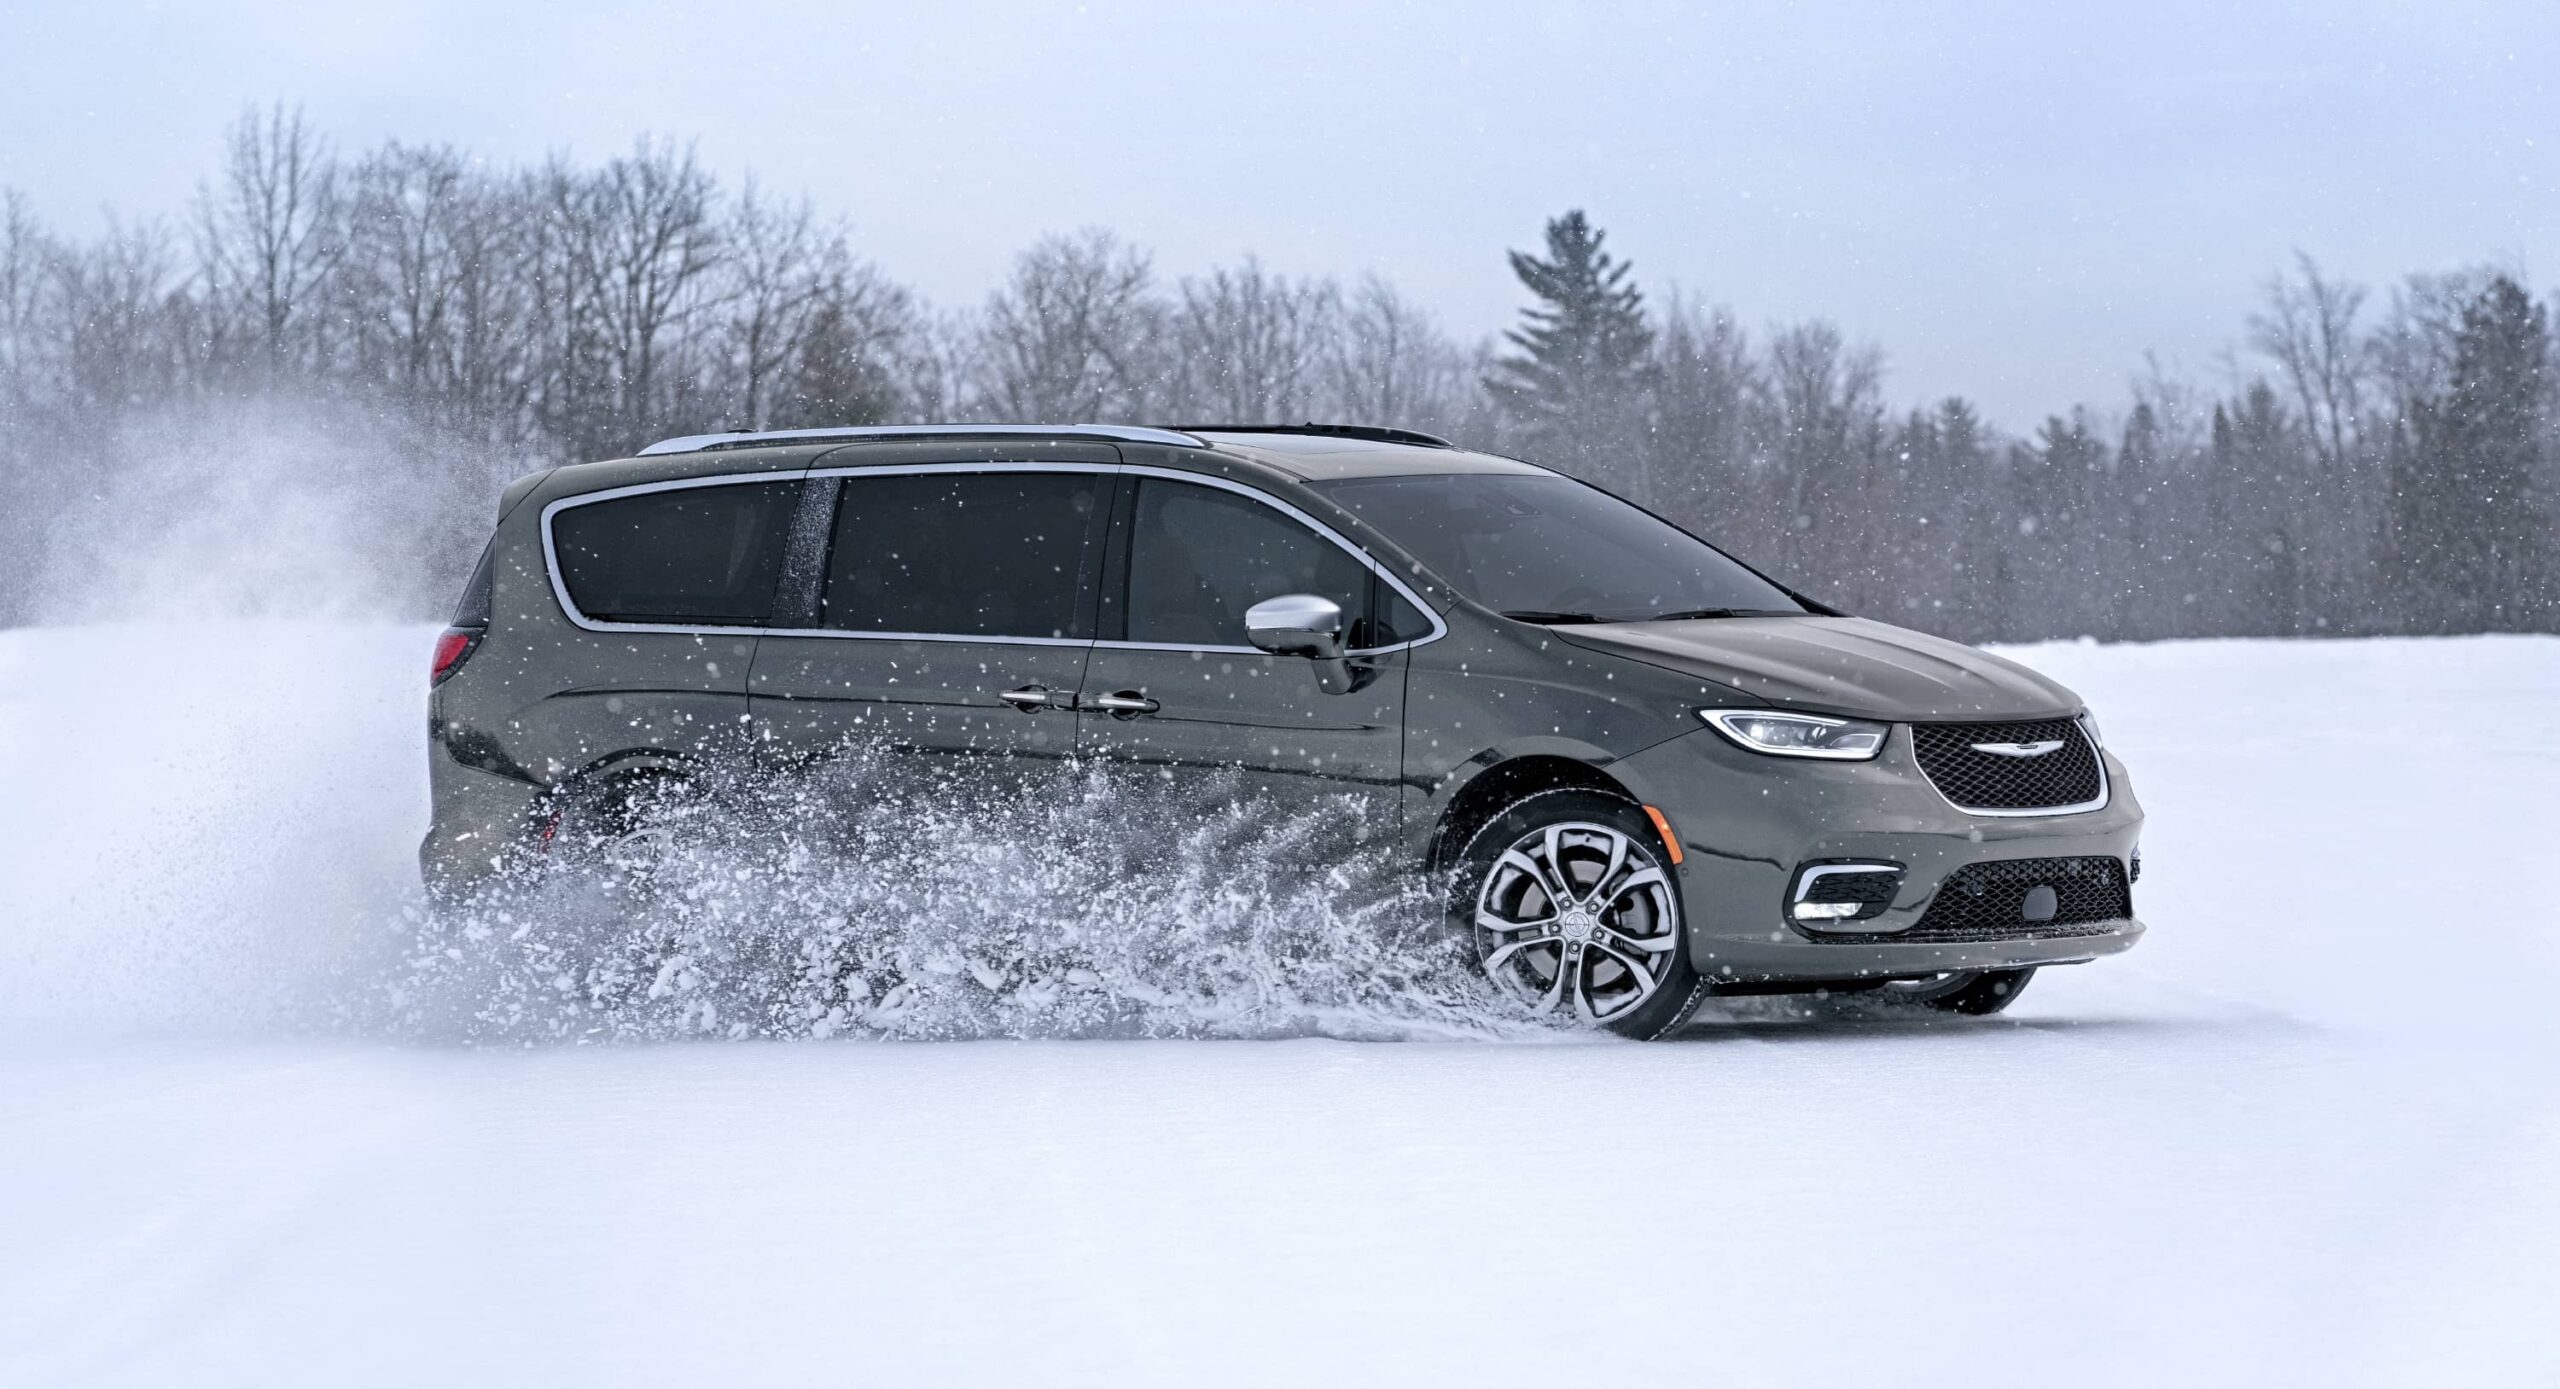 2022 Chrysler Pacifica image 02